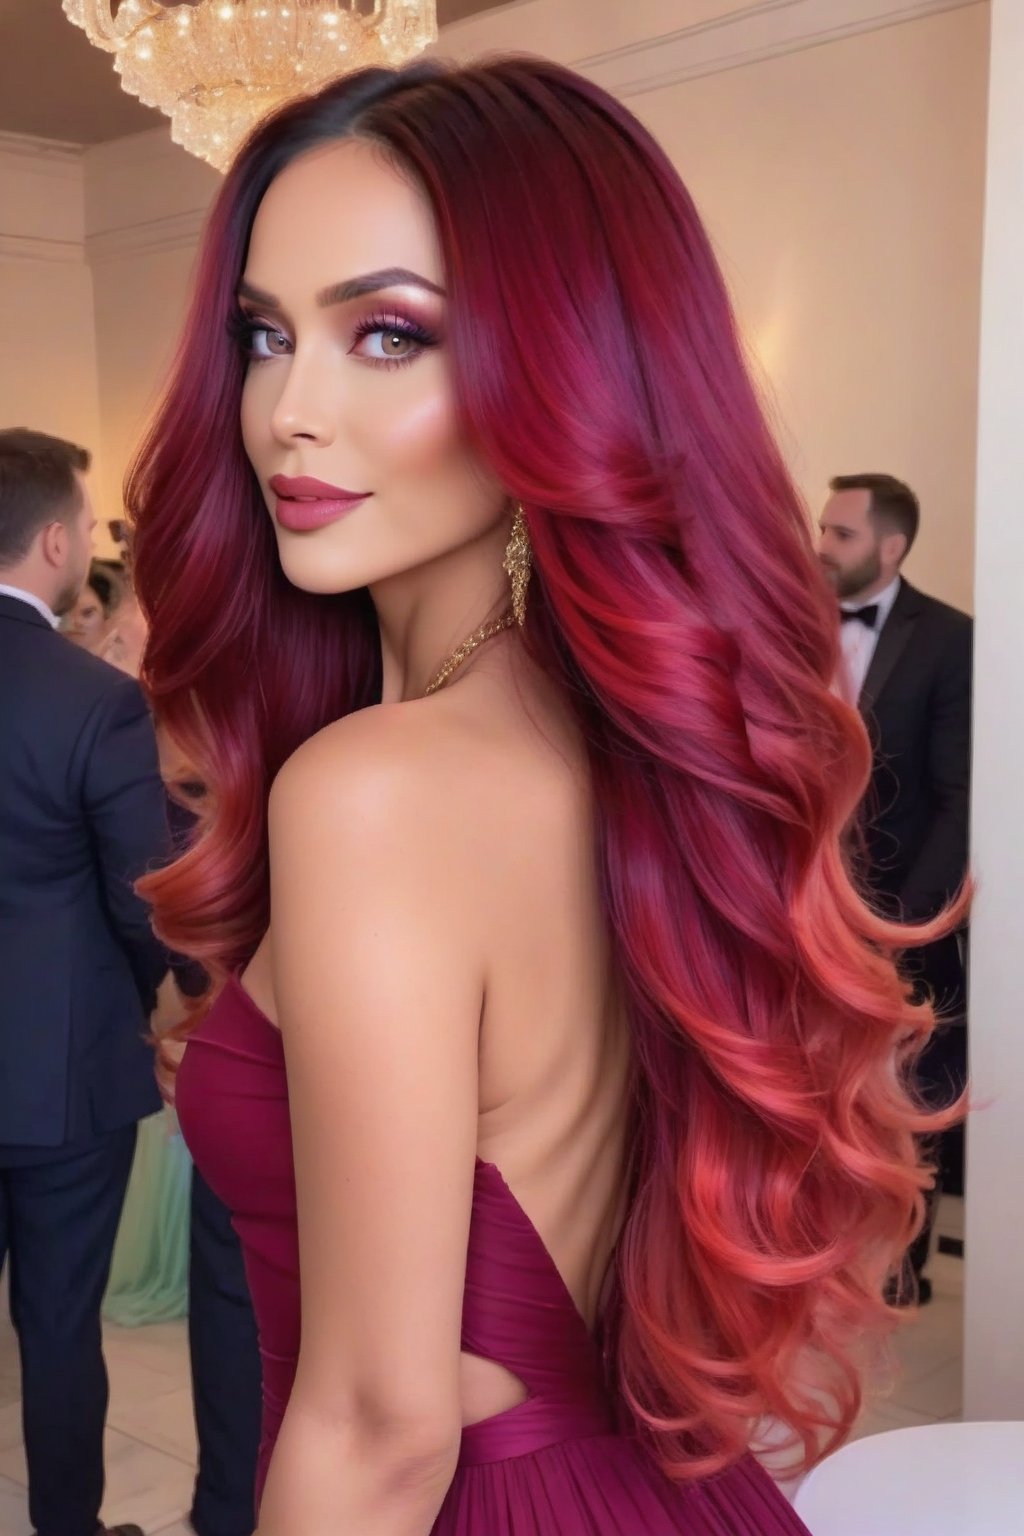 a stunning lady at party, her long vibrant voilet hair draped over one shoulder, , she is pure elegance and grace in her crimson coloured dress, long hair